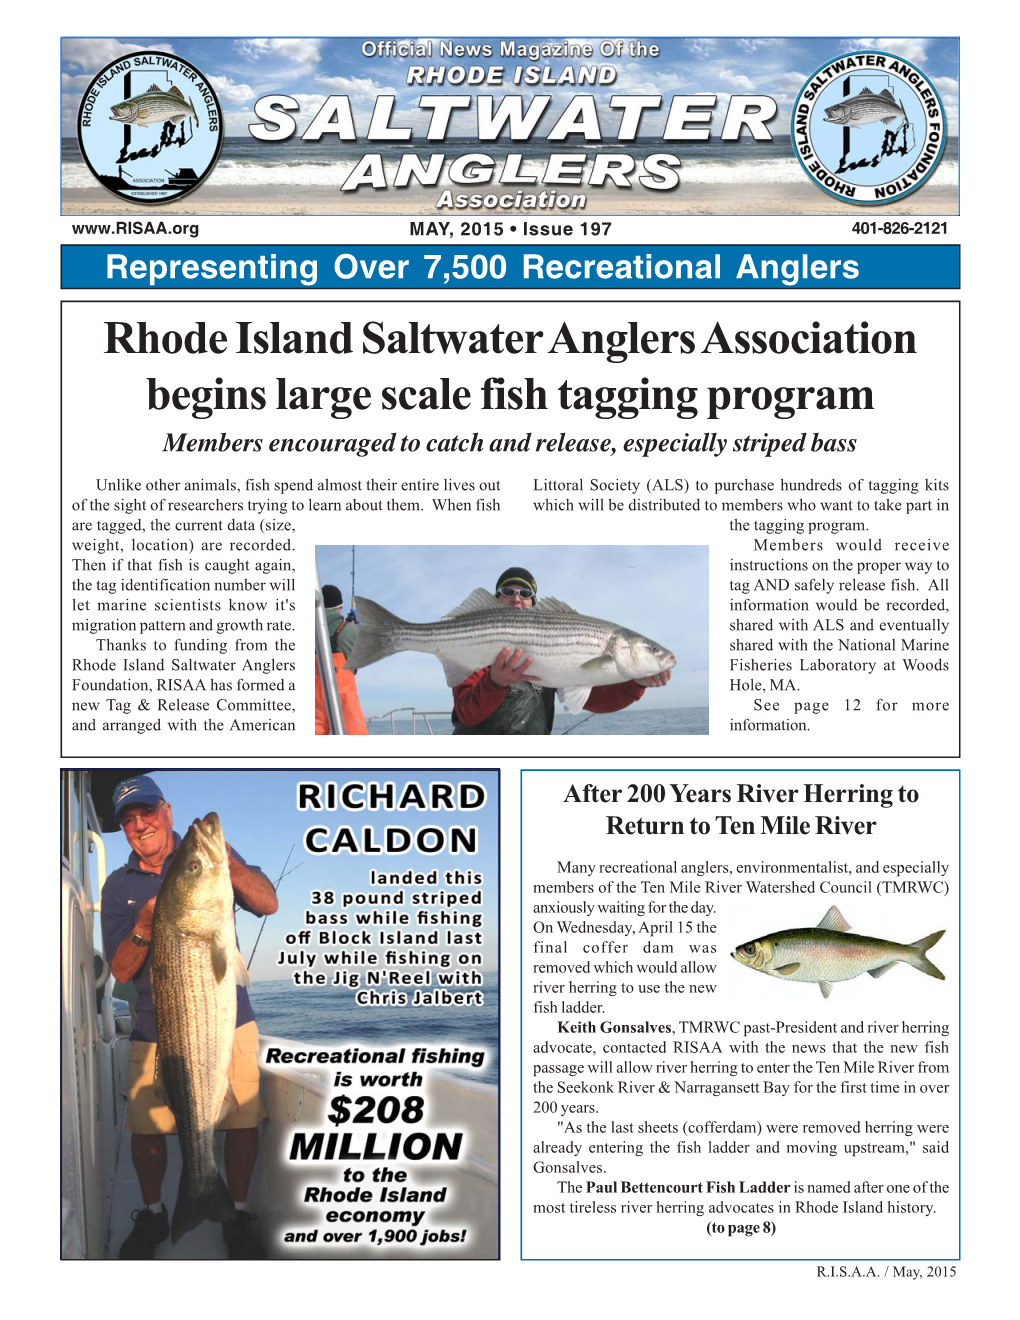 Rhode Island Saltwater Anglers Association Begins Large Scale Fish Tagging Program Members Encouraged to Catch and Release, Especially Striped Bass